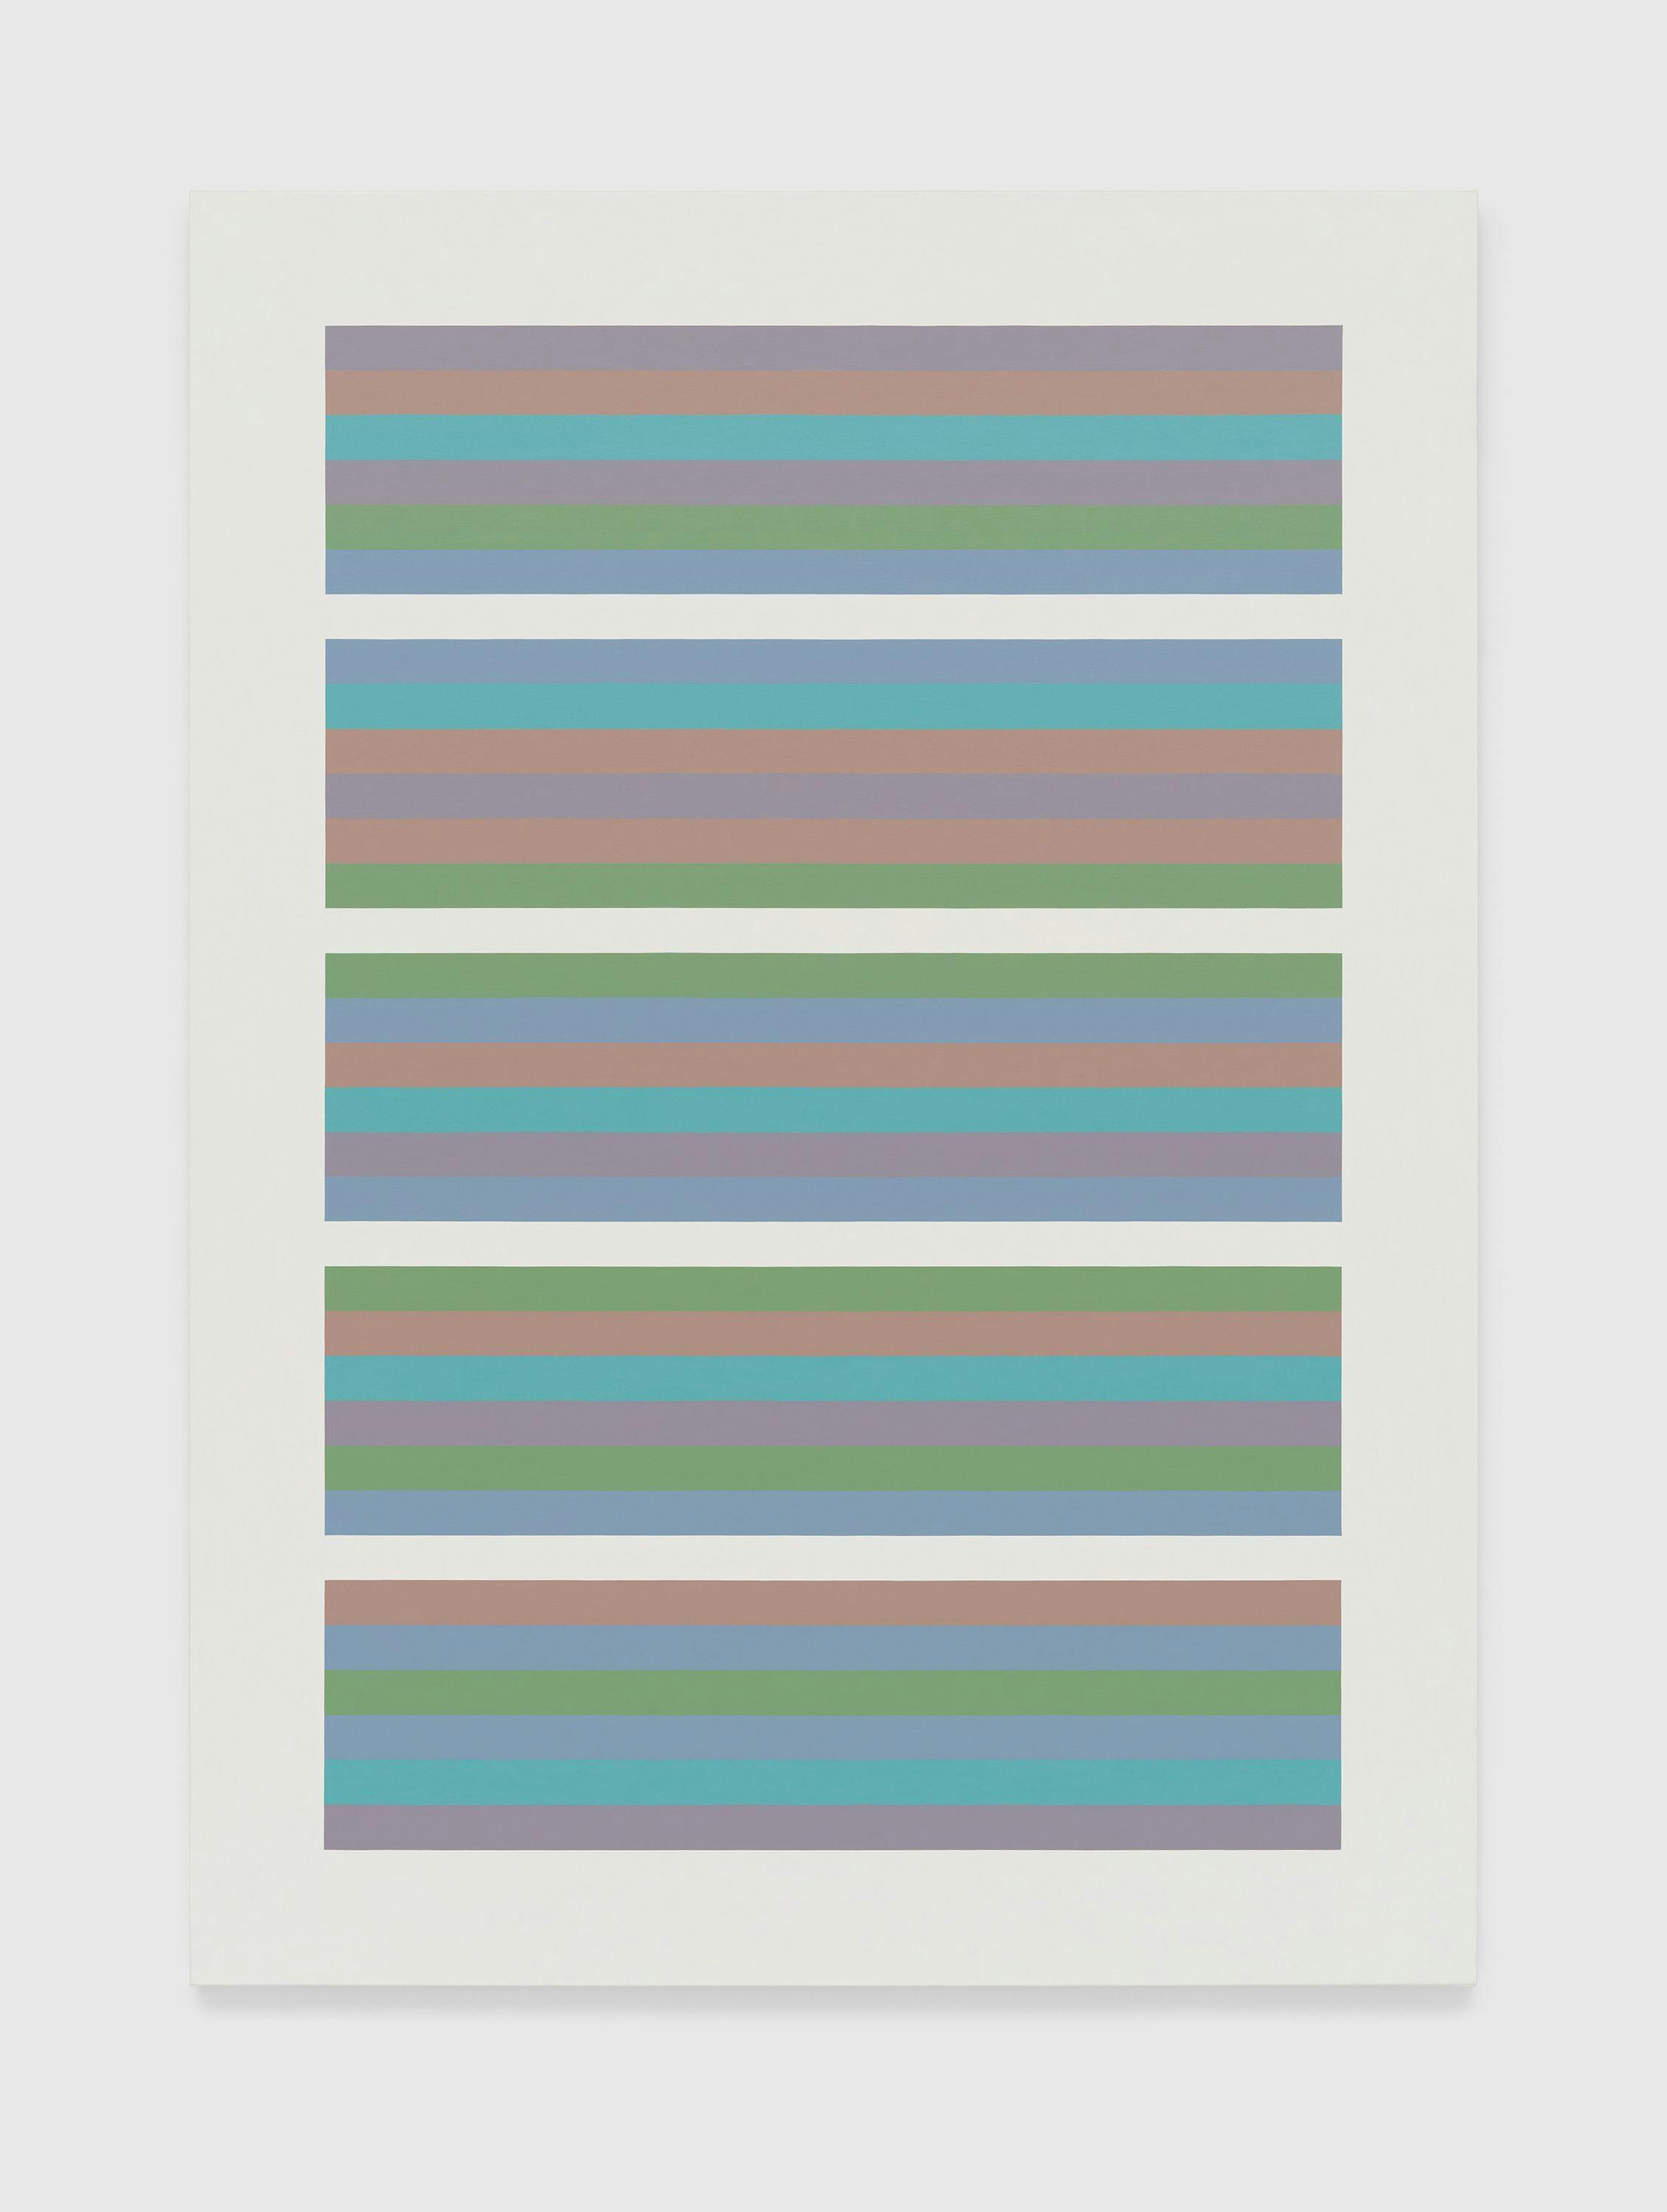 A painting by Bridget Riley, titled Intervals 12, dated 2021.